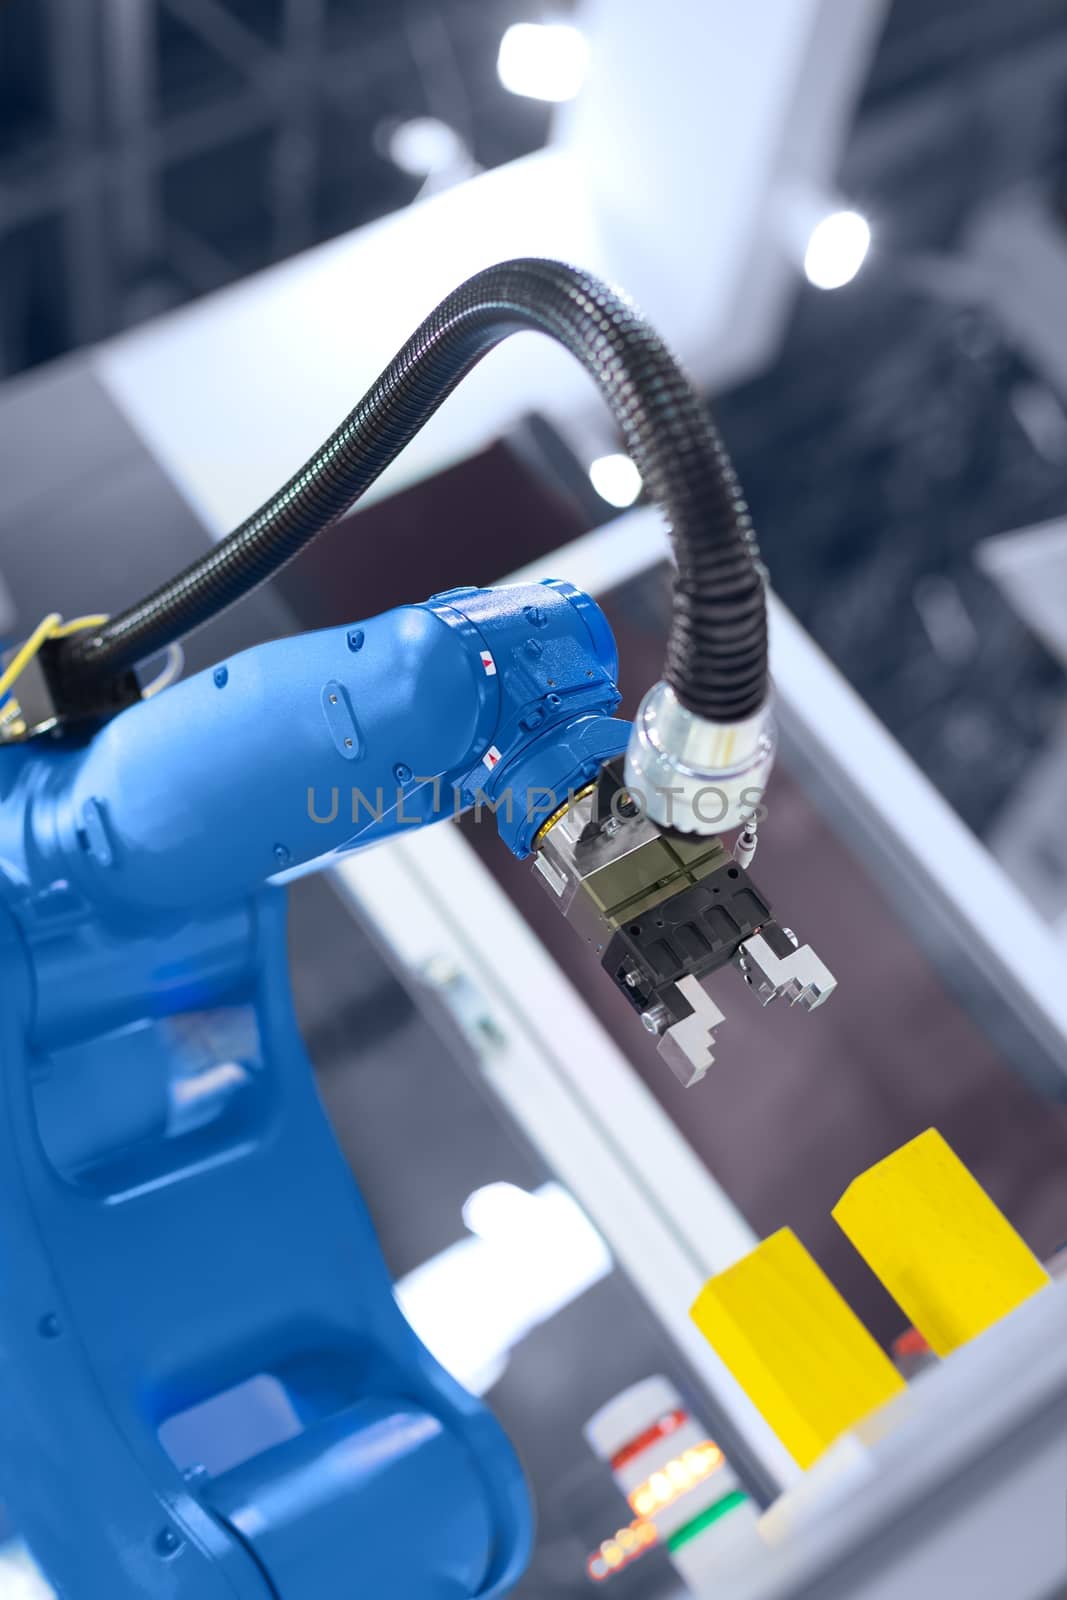 Automatic robot arm working in industrial environment close up